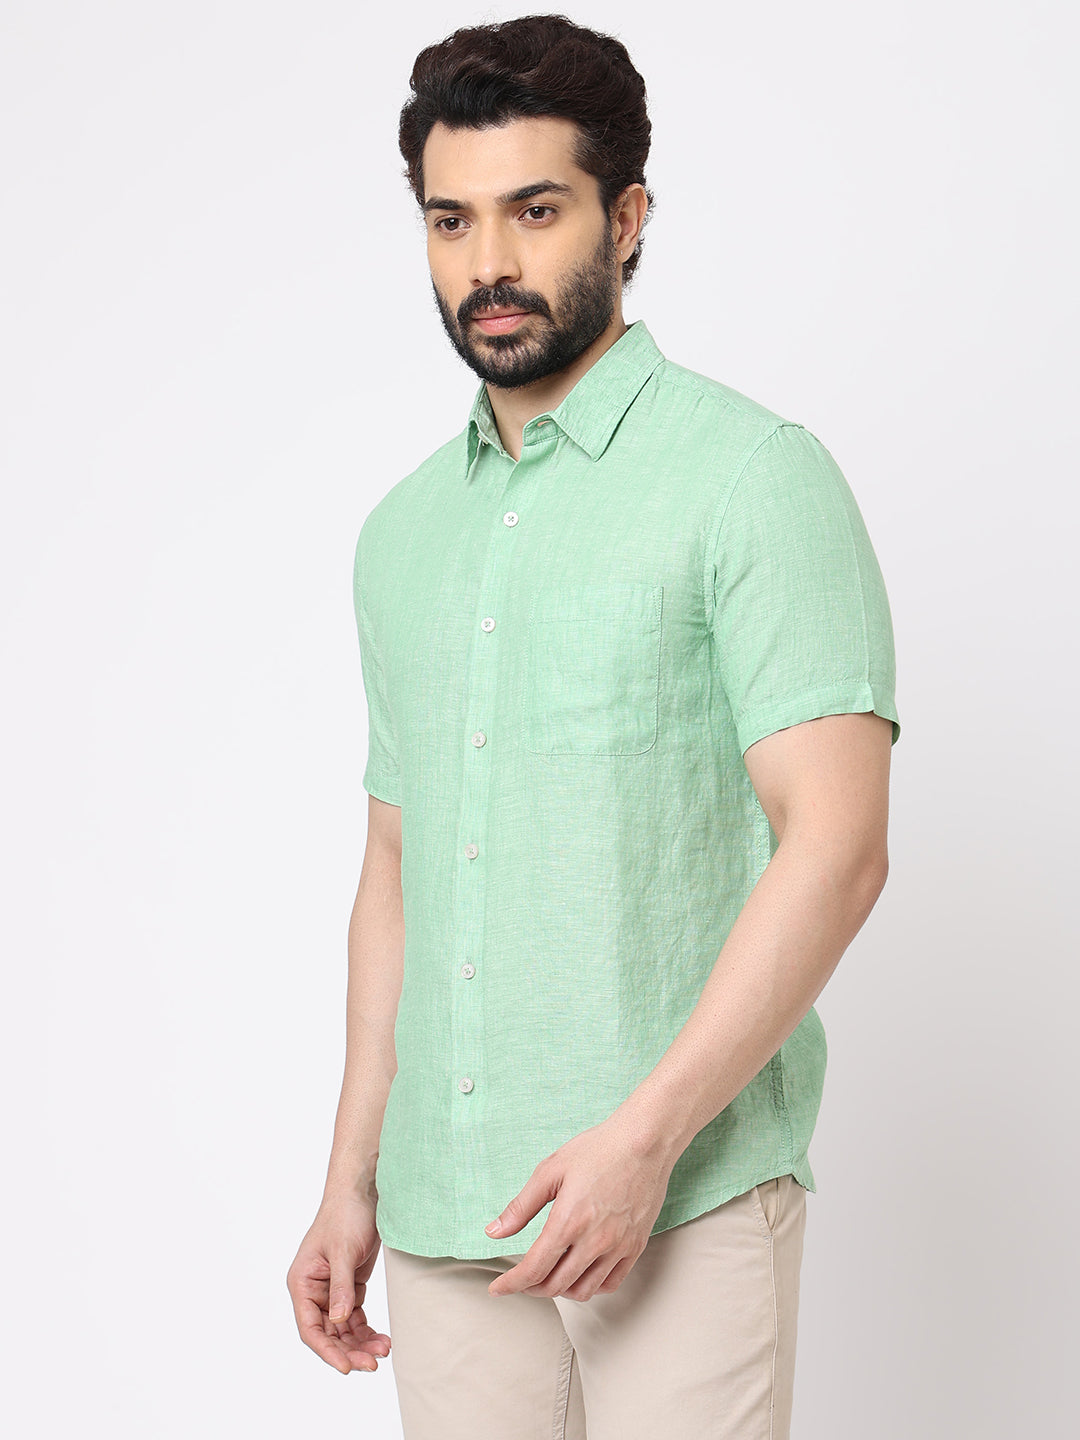 Branded Shirts Wholesale In Bangalore